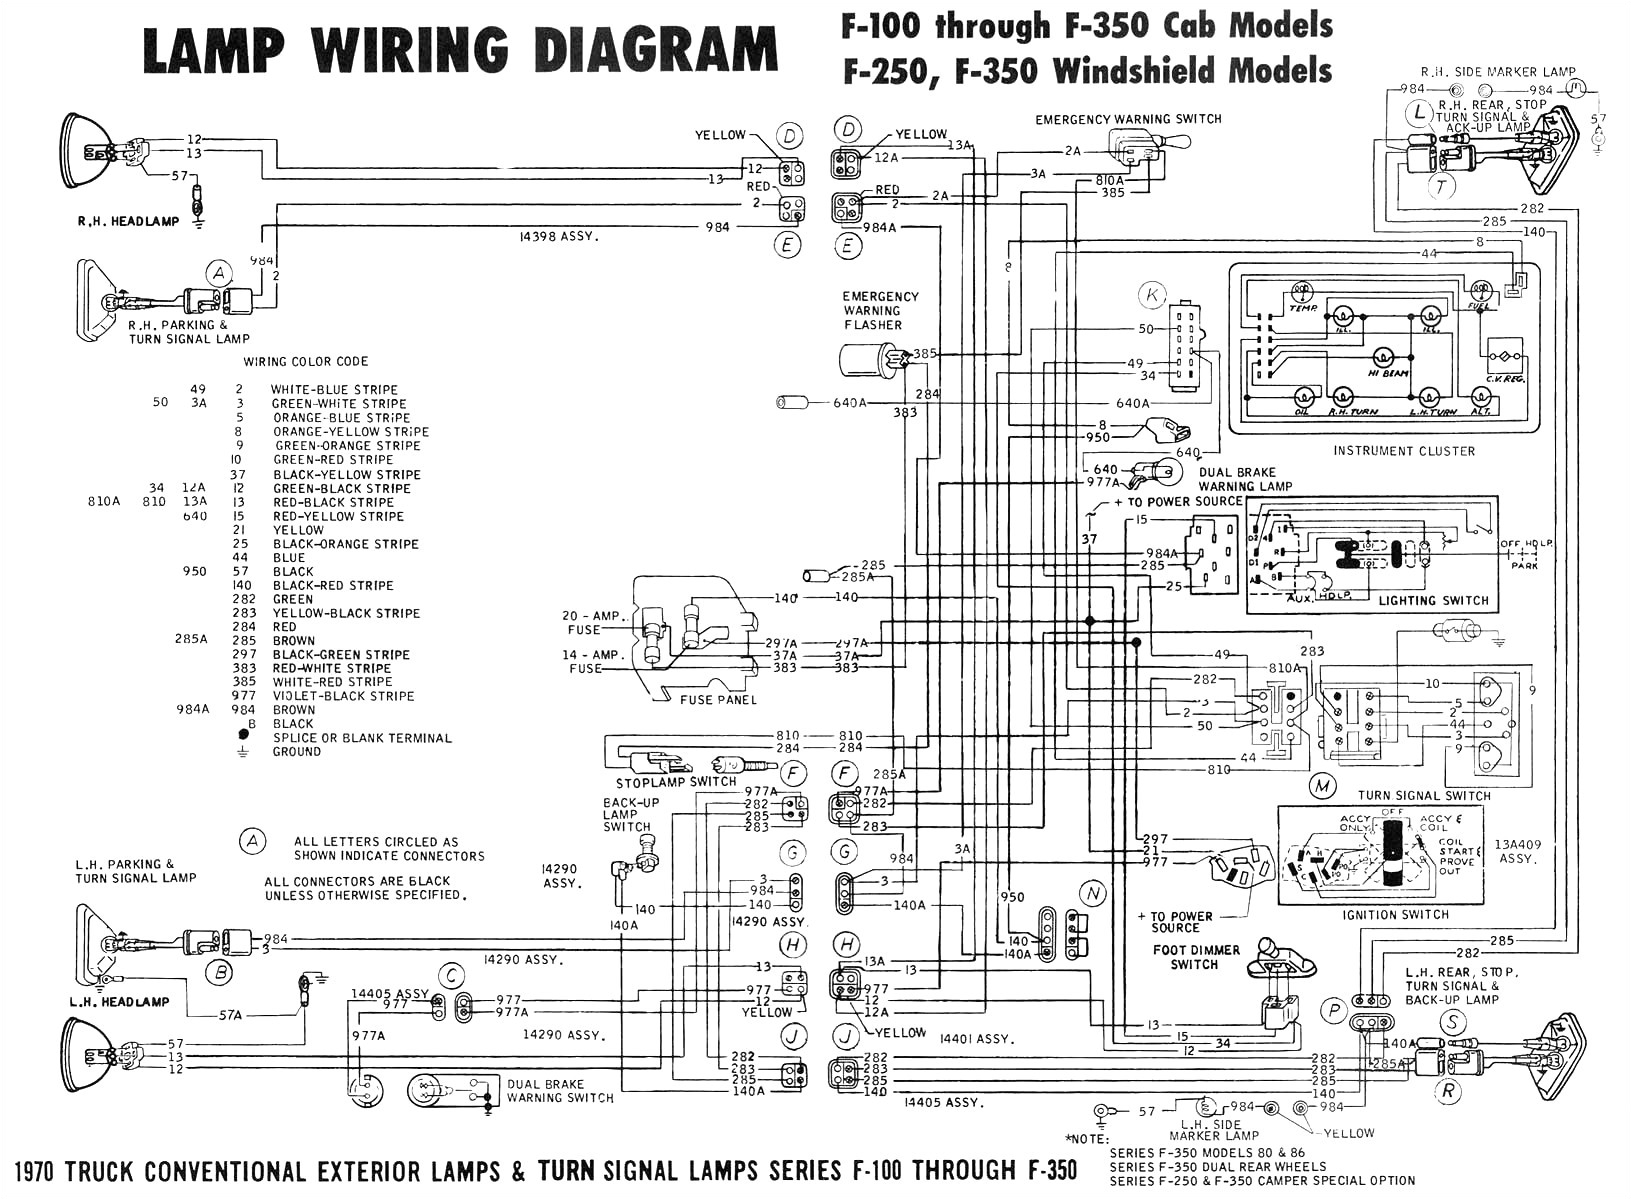 wiring diagram for ford mustang free wiring diagram database 06 mustang wiring diagram free download schematic